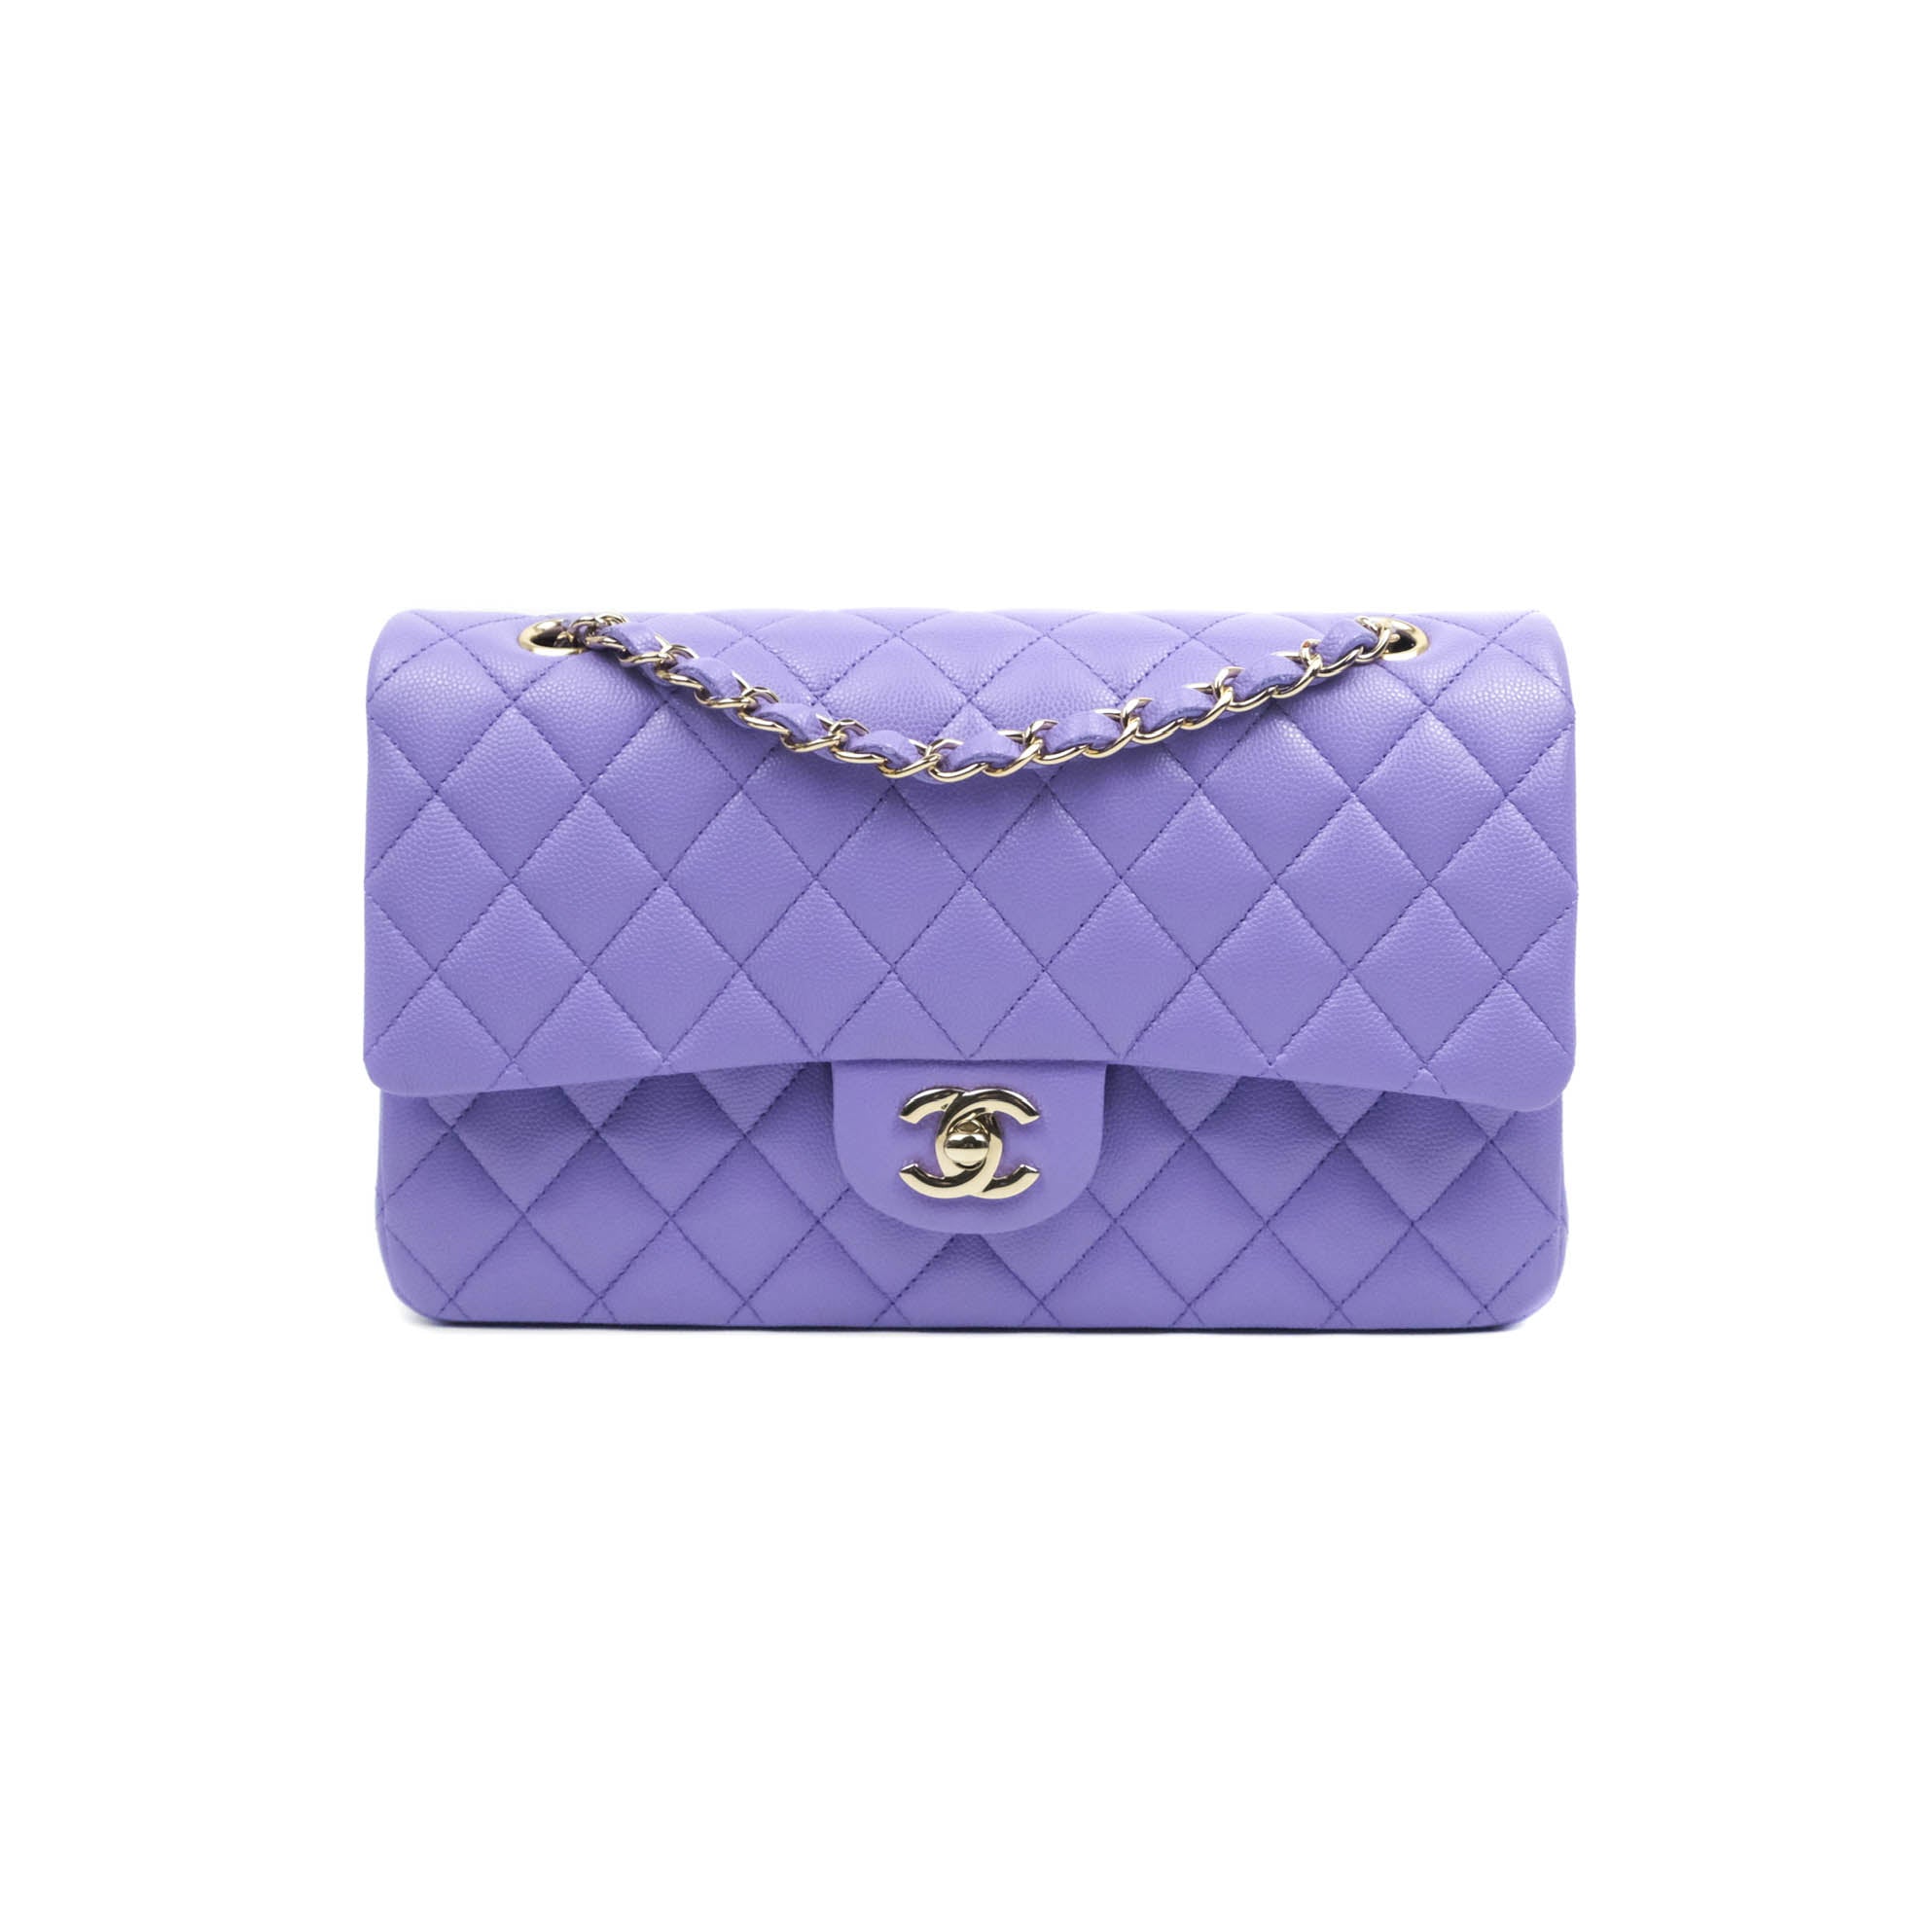 Chanel Classic Small Double Flap Violet Lambskin Leather, Gold Hardware,  Preowned in Box - Julia Rose Boston